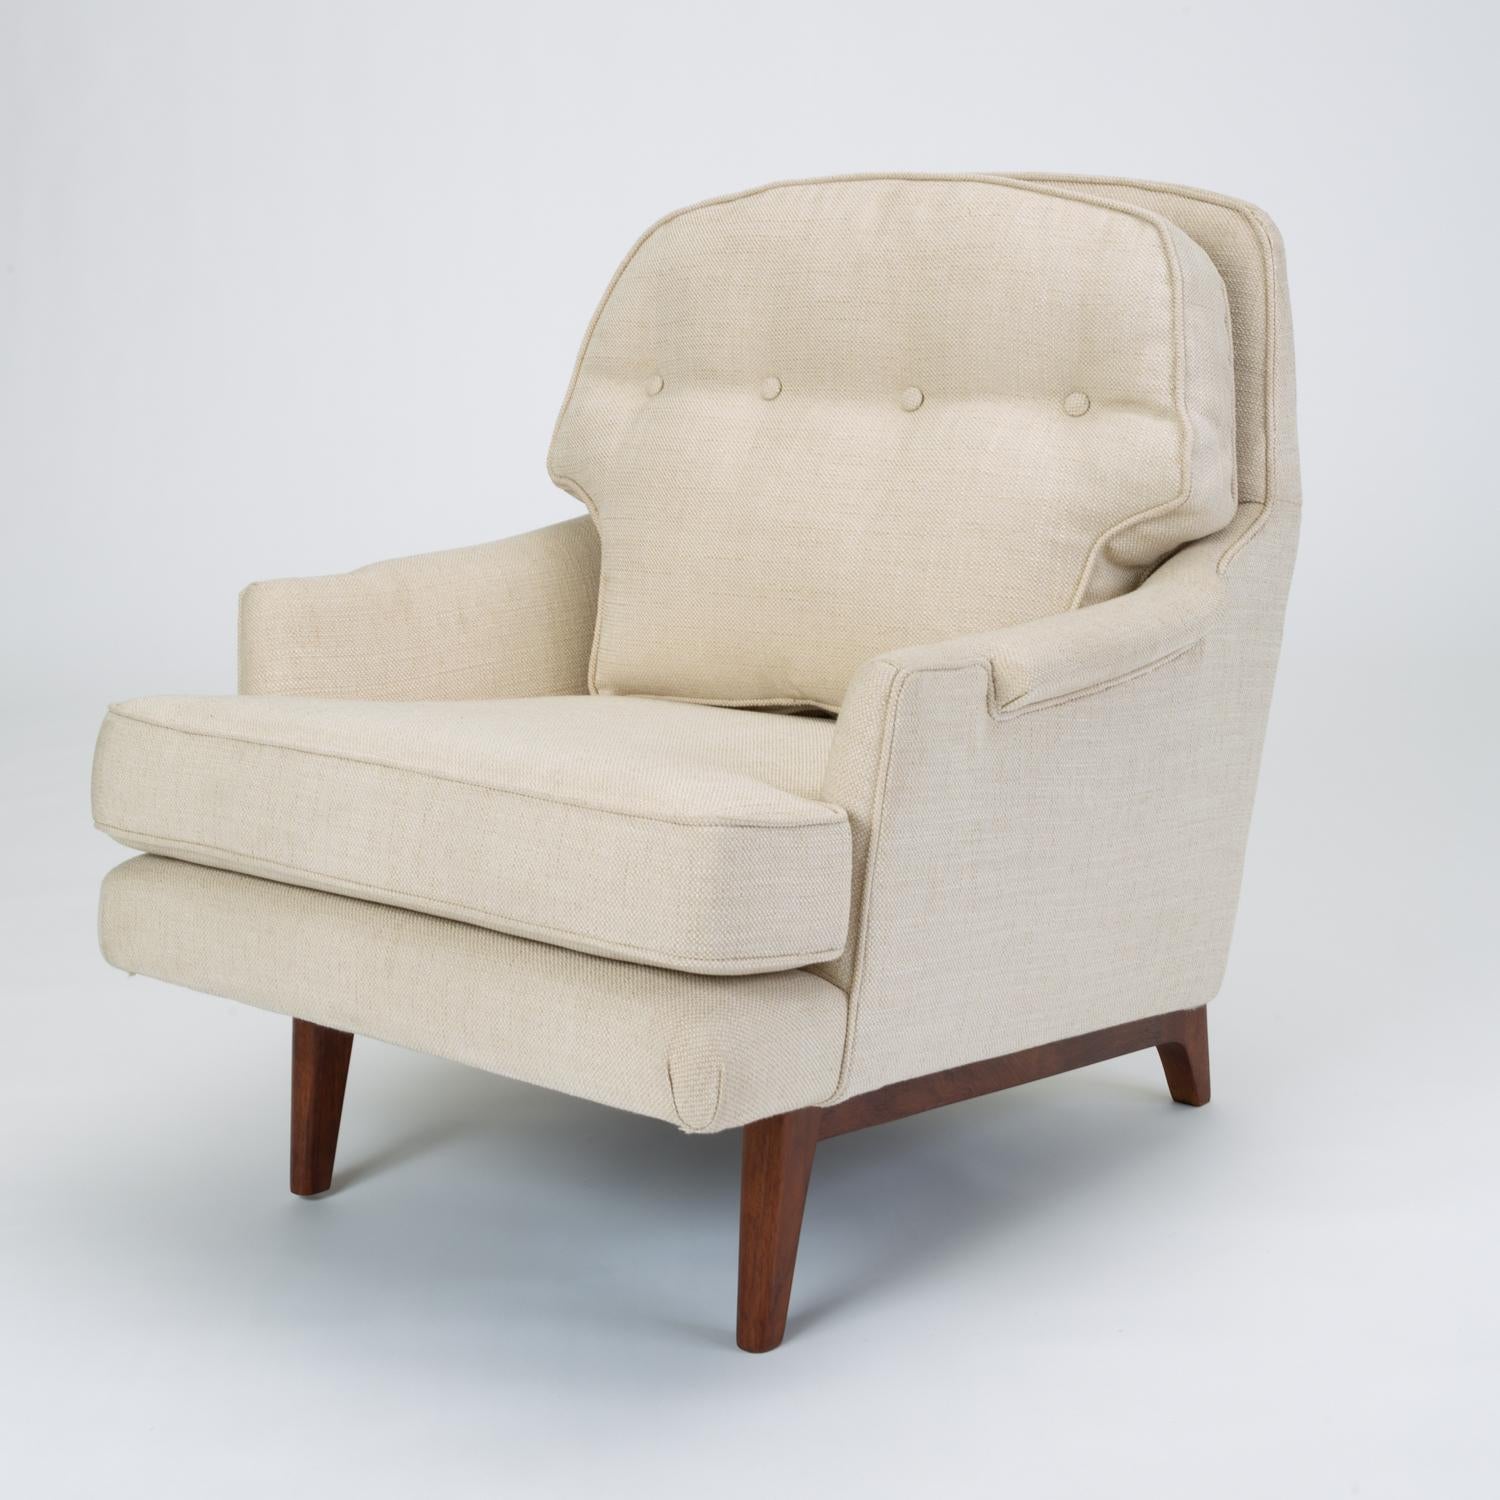 American Lounge Chair with Bracket Base by Roger Sprunger for Dunbar